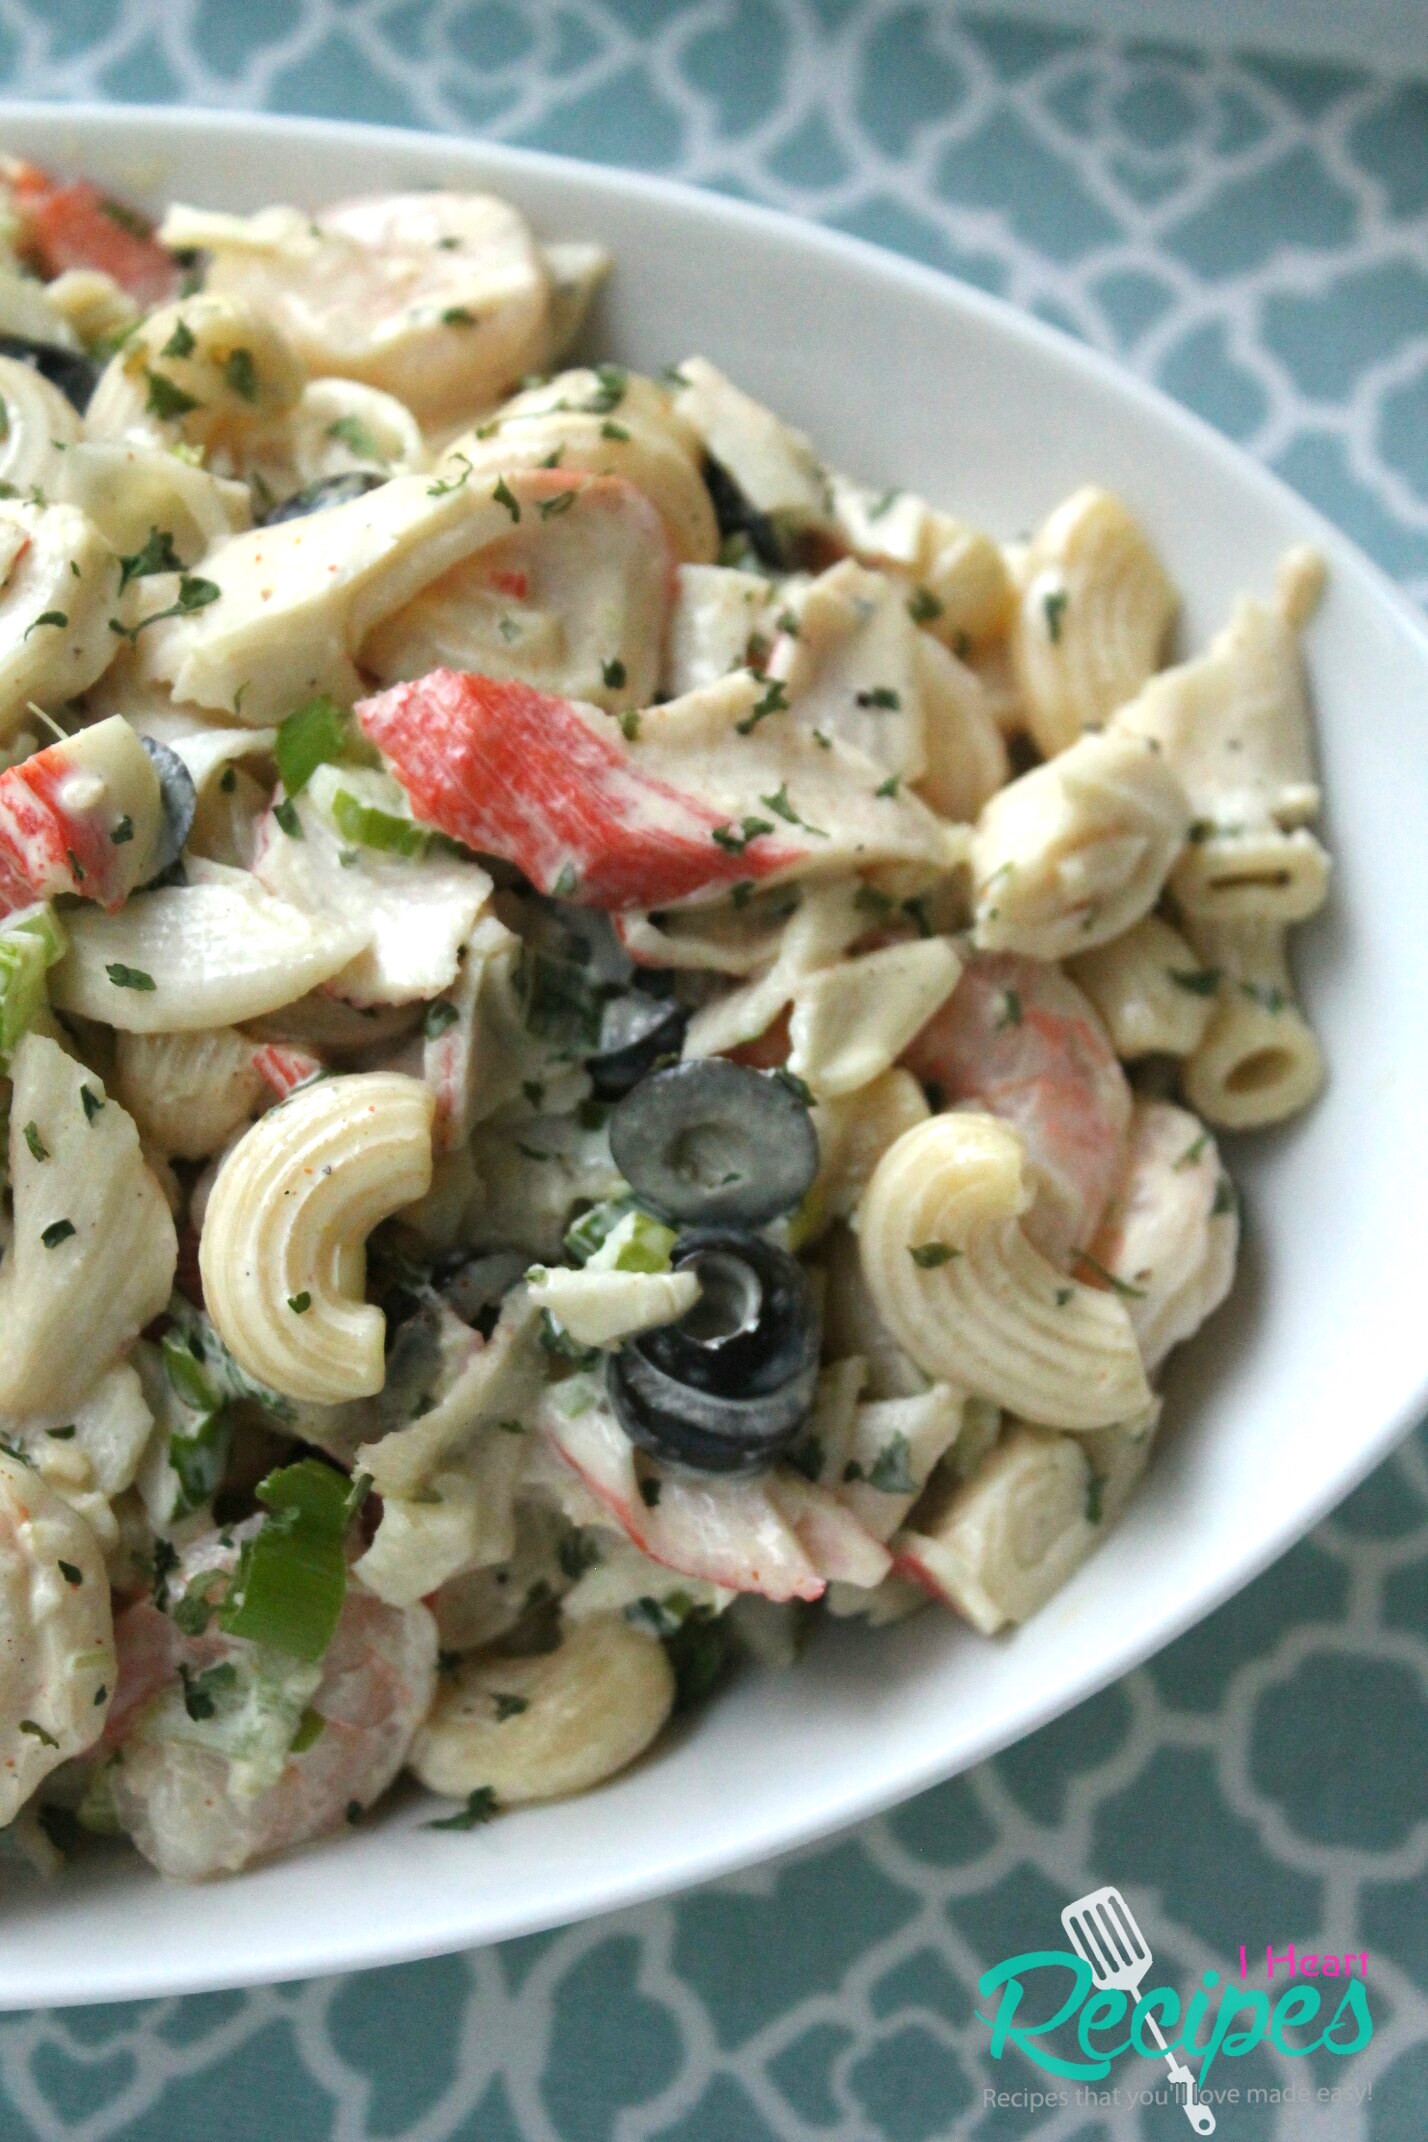 Delicious pasta with chunks of seafood